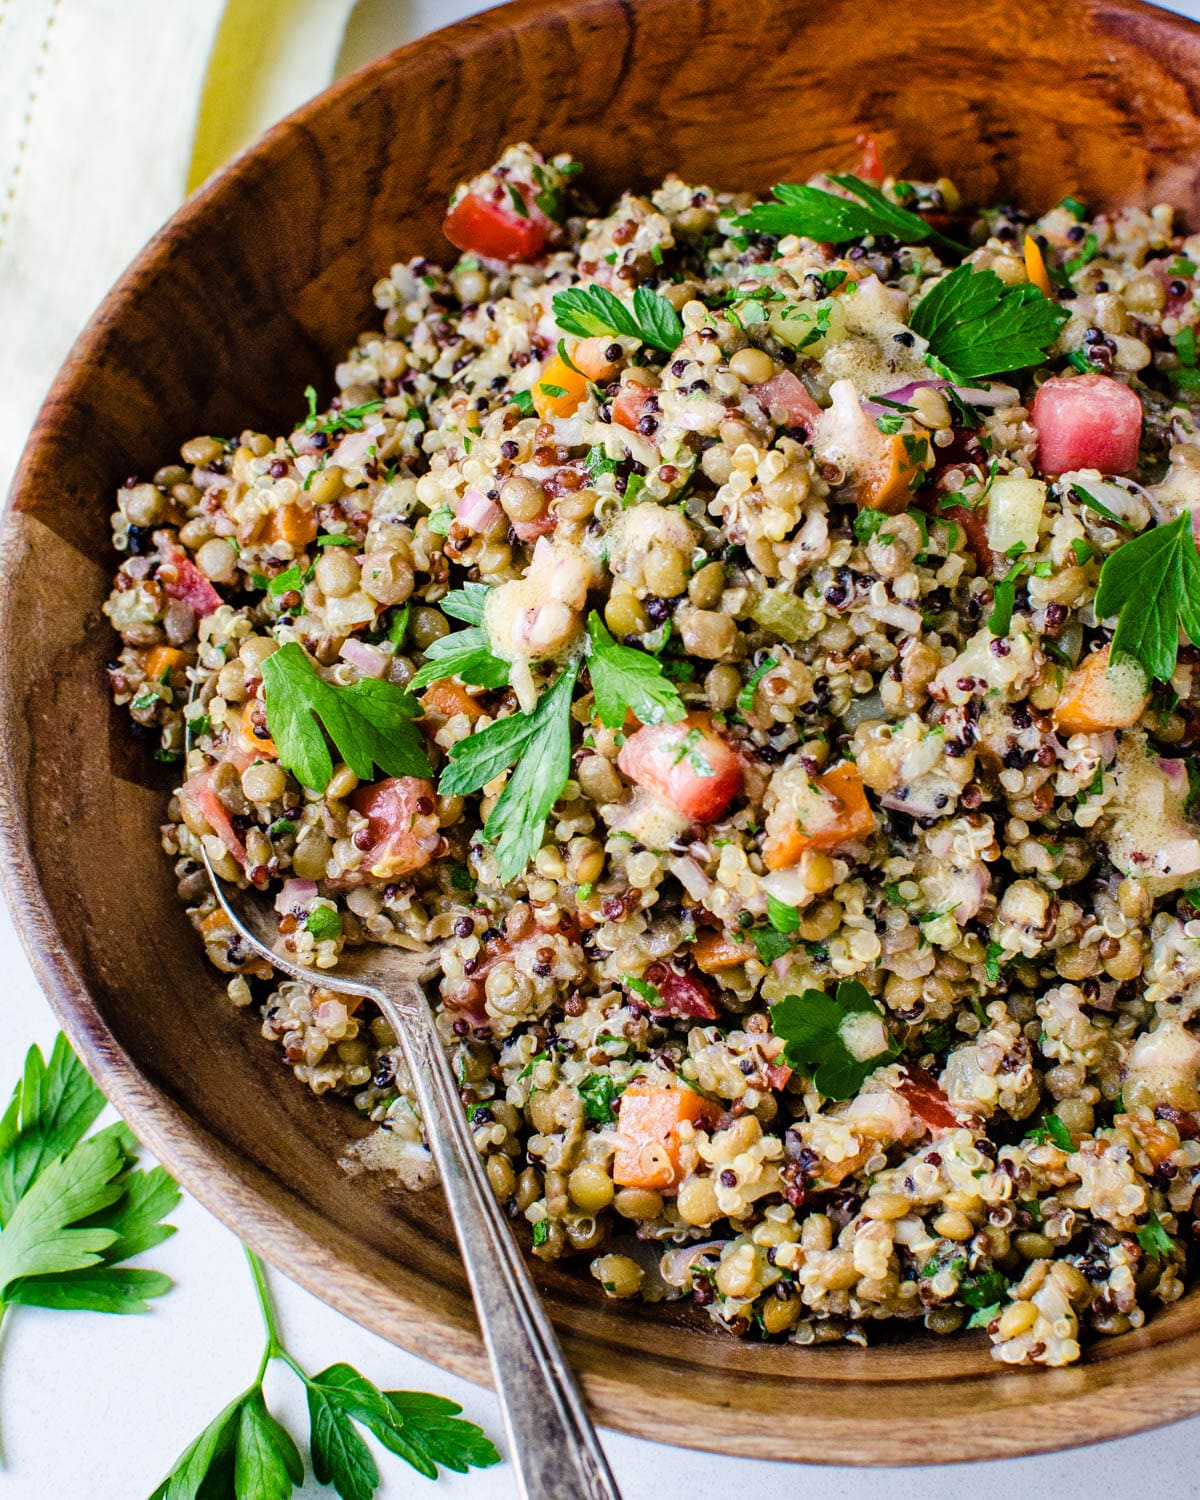 Homemade lentil salad with quinoa, fresh vegetables and herbs.